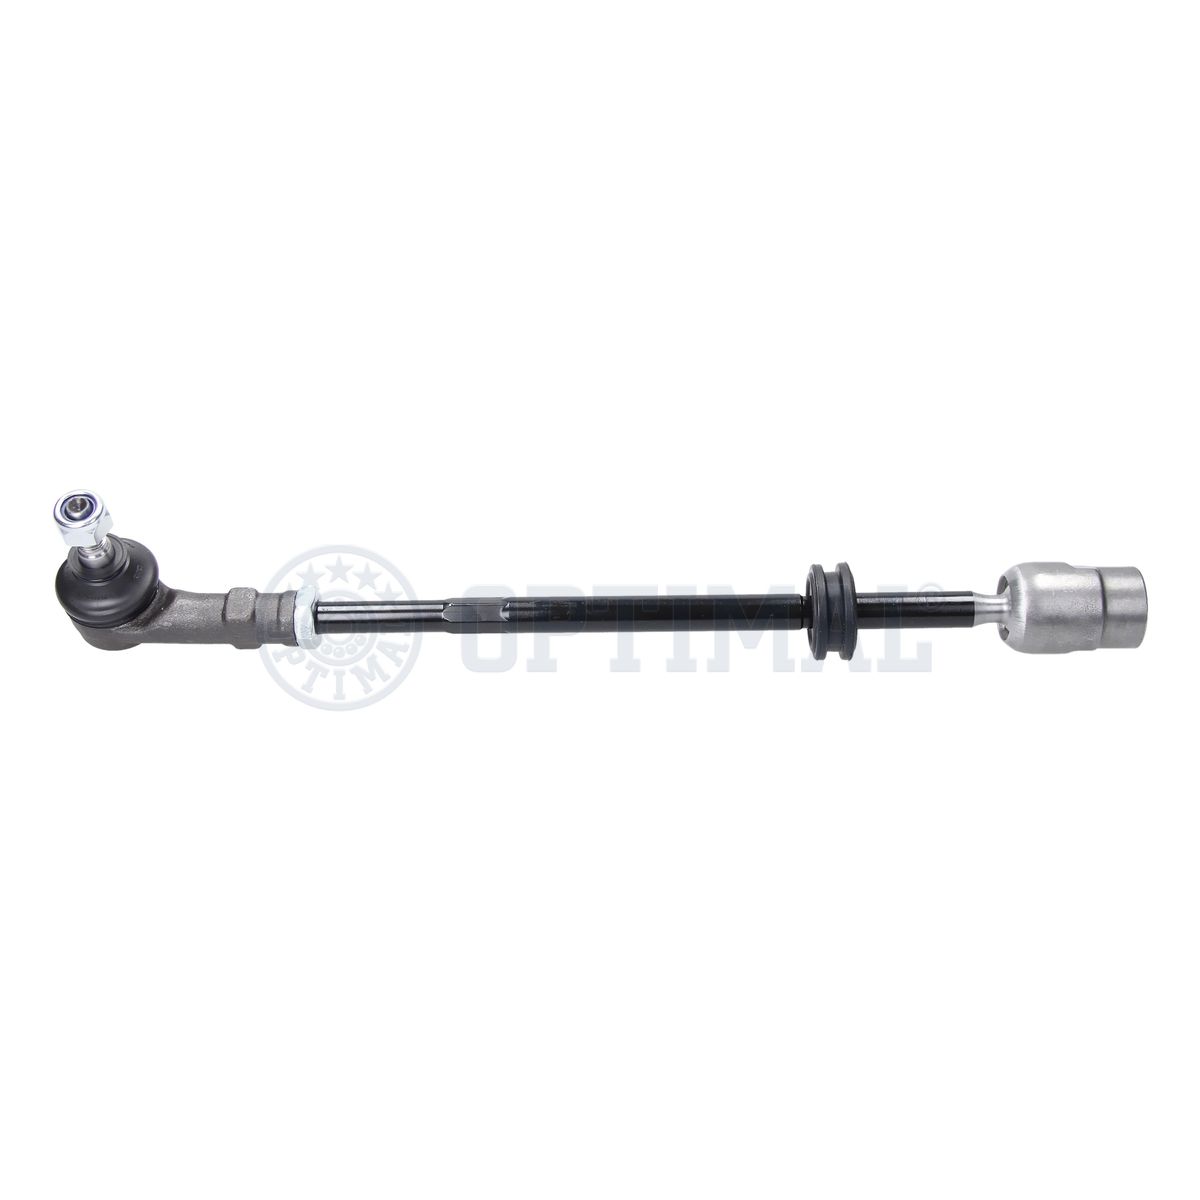 G0-049, Tie Rod, OPTIMAL, 191419803, 191419803A, 02146, 025390049617, 040164B, 0591201, 10556598, 1160307142, 12.05.341, 14946, 19892, 250144, 30100342, 41-03572, 44-DS-7142, 46027, 5002307, 63430, 6-402, 850029000, 915437, DL7510, FDL6031, FL938-A, GSJ745, IR-40.049, JRA215, QDL2079S, TL294, VO-DS-7142